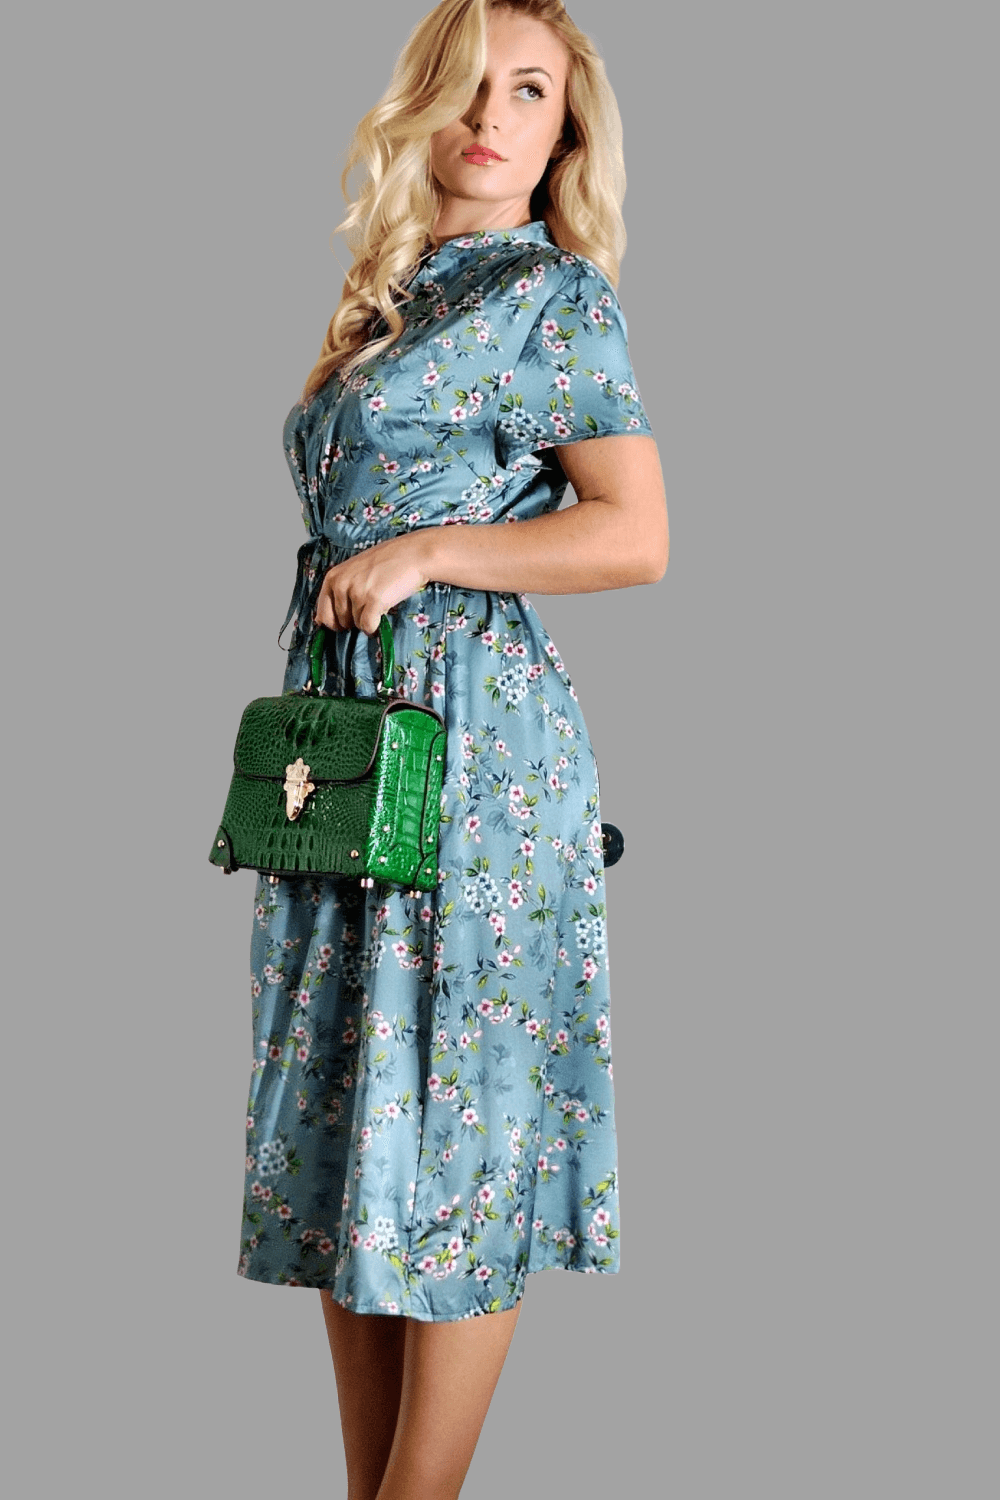 Mulberry Silk Dress with Cherry Blossom Pattern in Blue